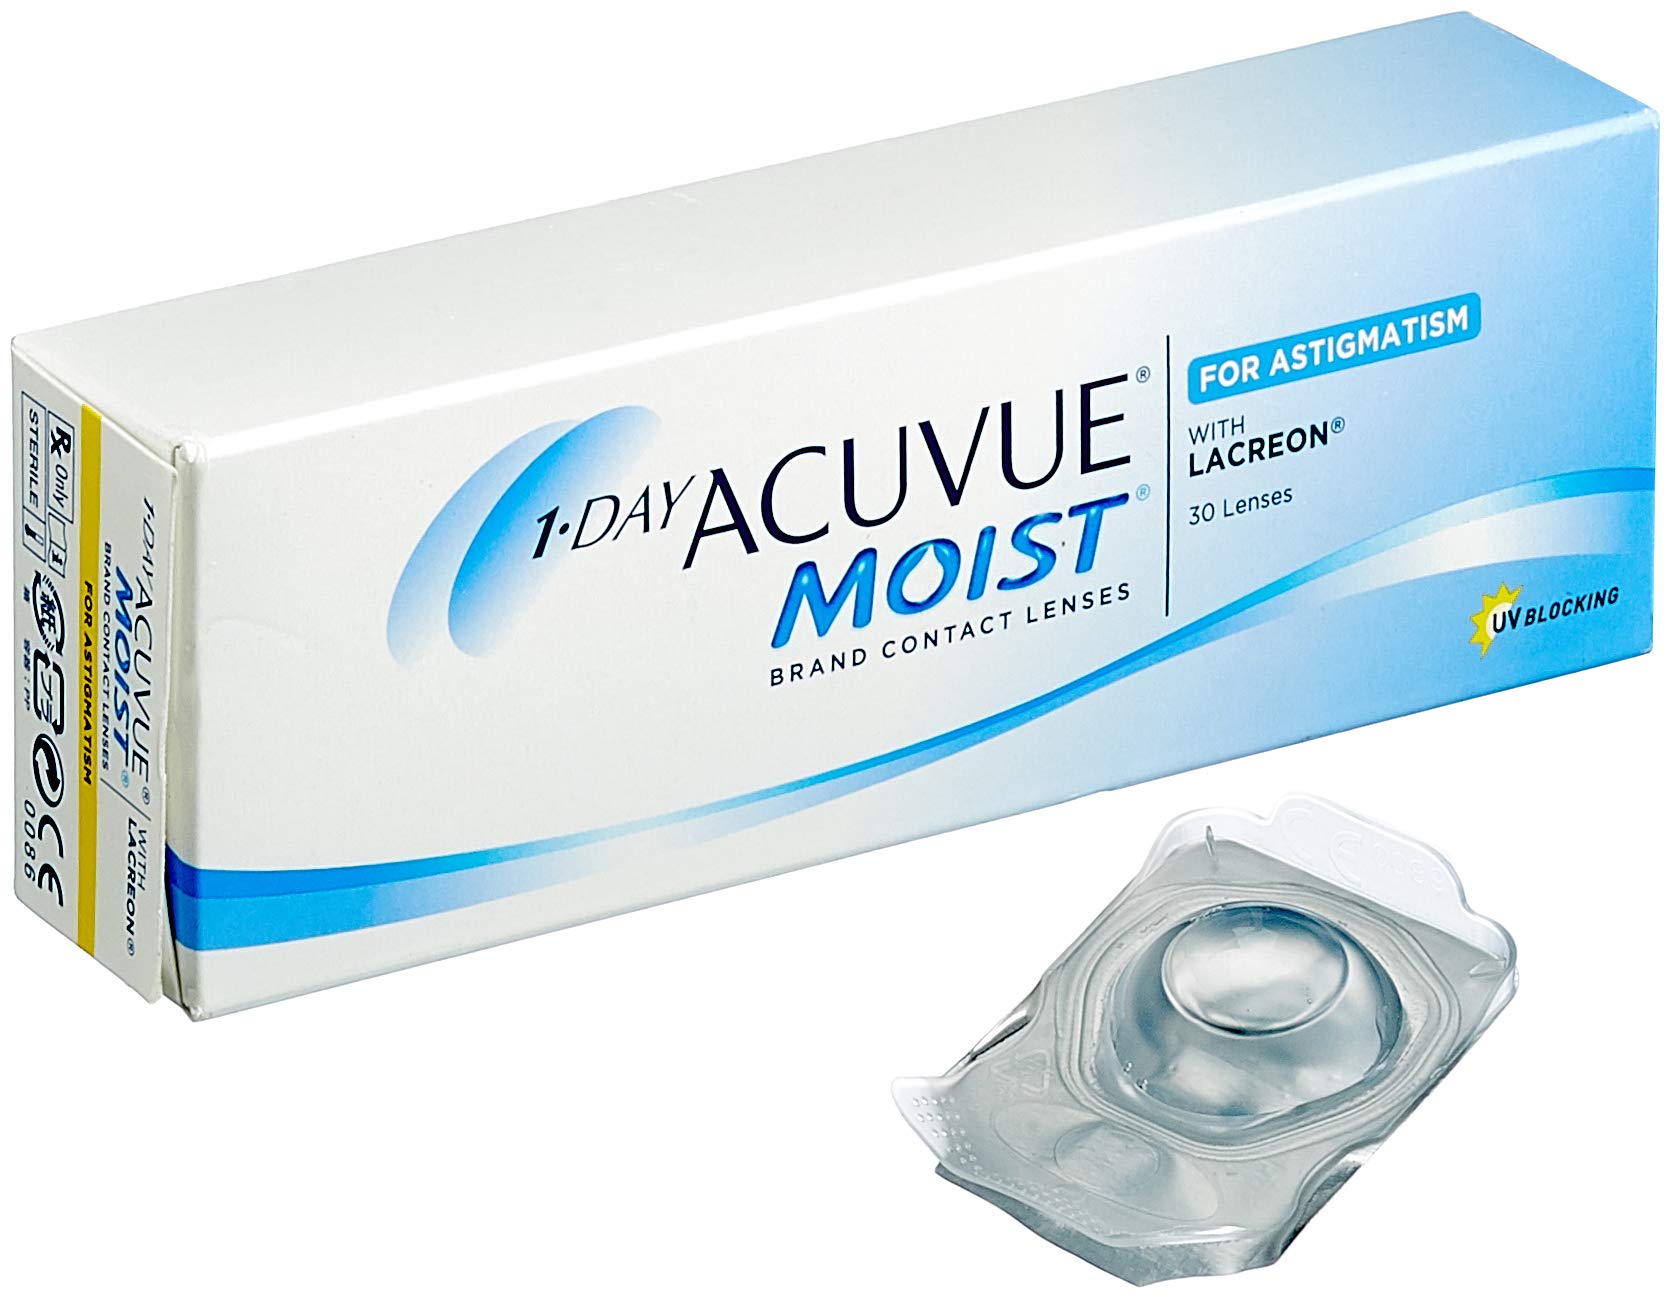 Acuvue 1-Day Moist for Astigmatism Tageslinsen weich, 30 Stück/BC 8.5 mm/DIA 14.5 / CYL -1.25 / ACHSE 120 / -7 Dioptrien